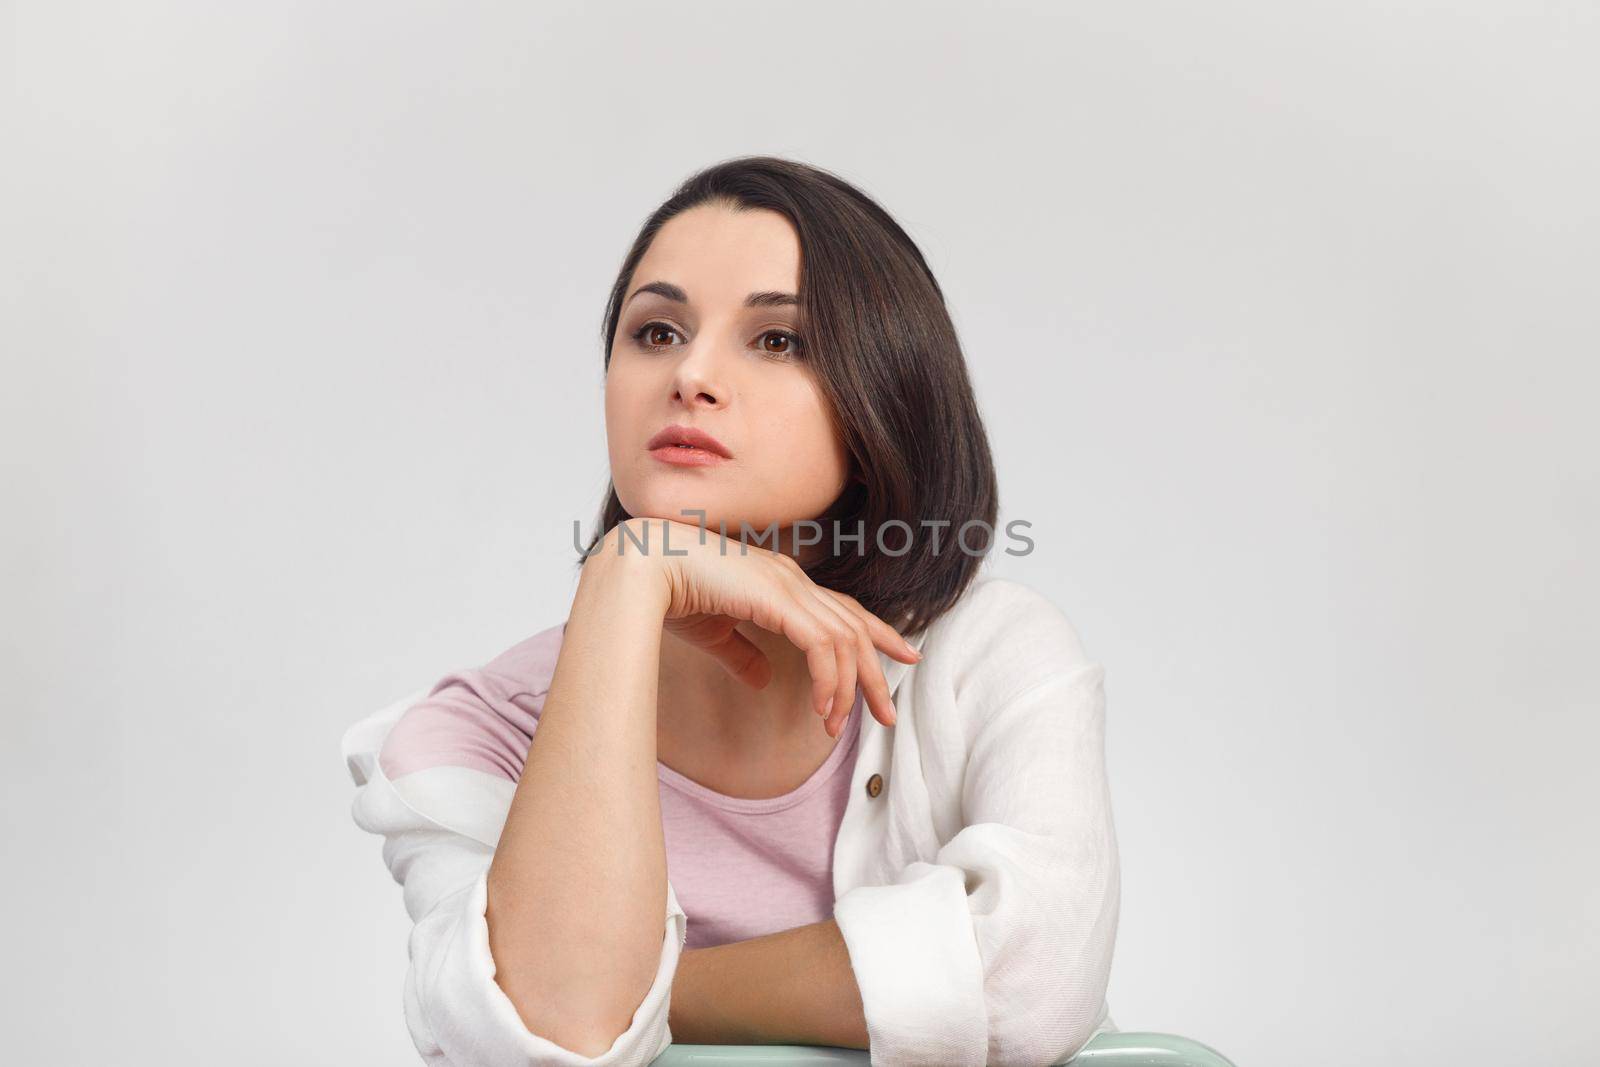 High-key studio portrait of a young dreaming woman in light clothes looking into the distance.